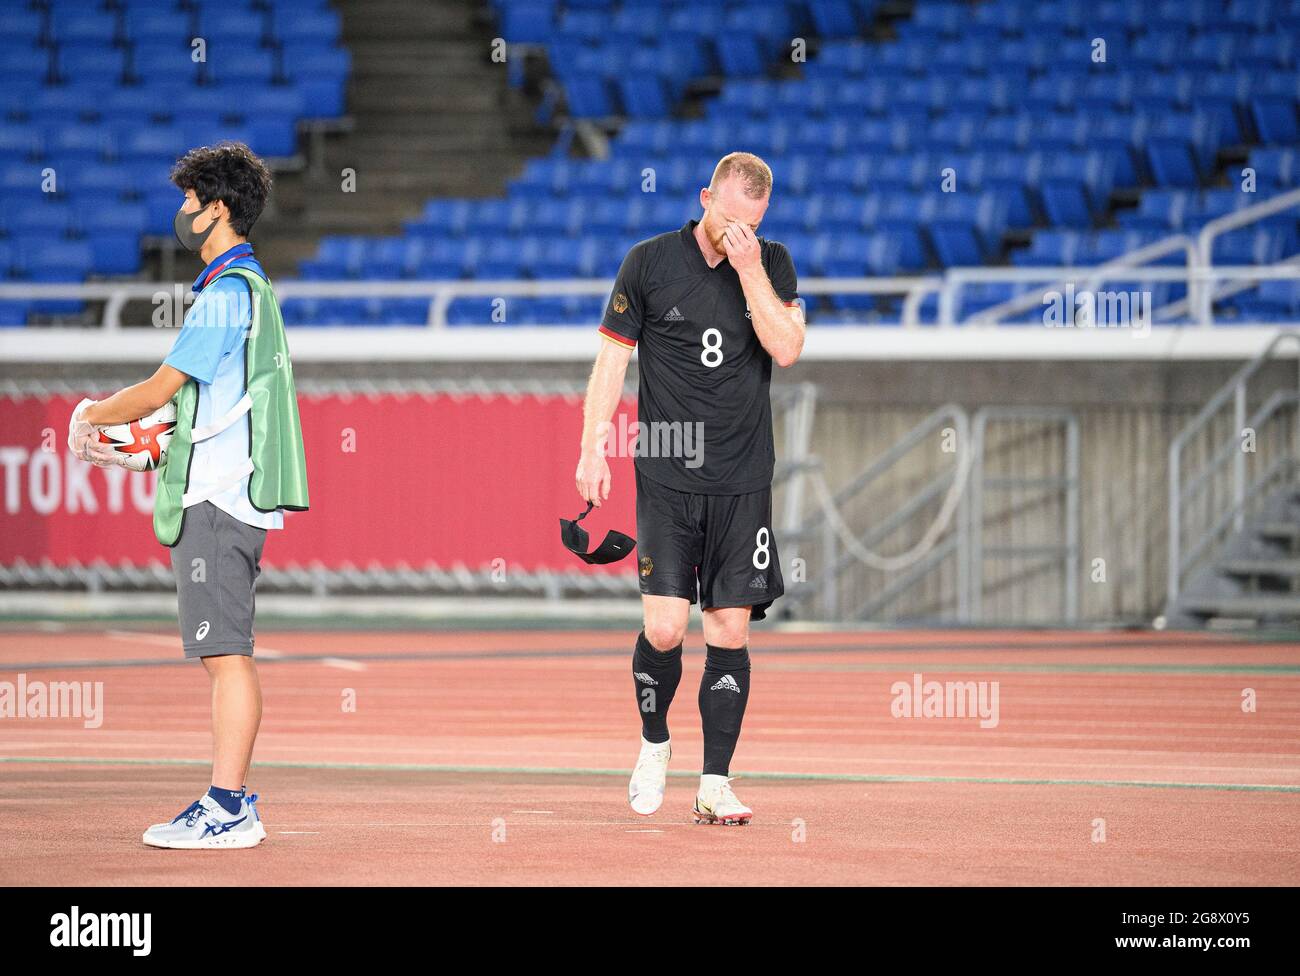 Maximilian ARNOLD (GER) after his yellow-red card, expulsion, soccer preliminary round of the men's group D, Brazil (BRA) - Germany (GER), on 07/22/2021 in Yokohama. Olympic Summer Games 2020, from 23.07. - 08.08.2021 in Tokyo / Japan. Â Stock Photo